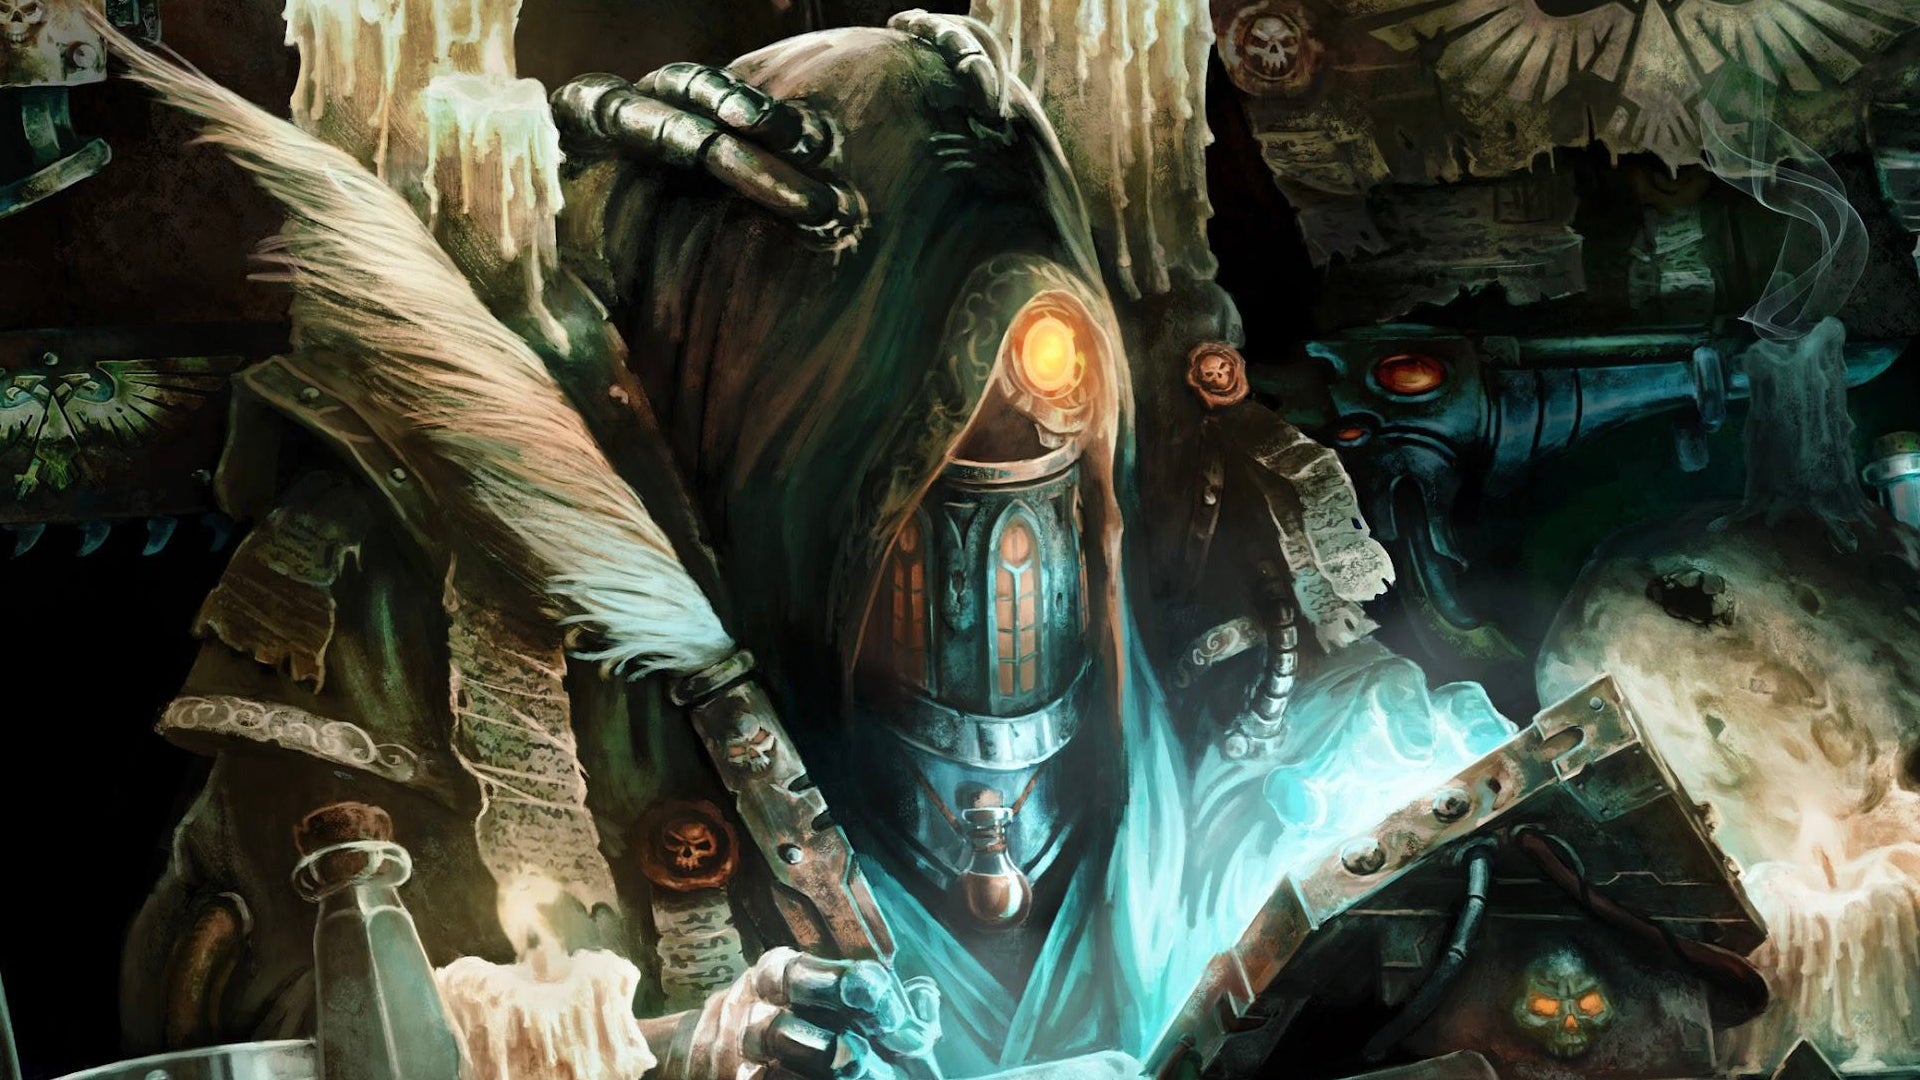 Image for Warhammer 40,000 RPG Imperium Maledictum details Patrons mechanic and reveals exclusive artwork